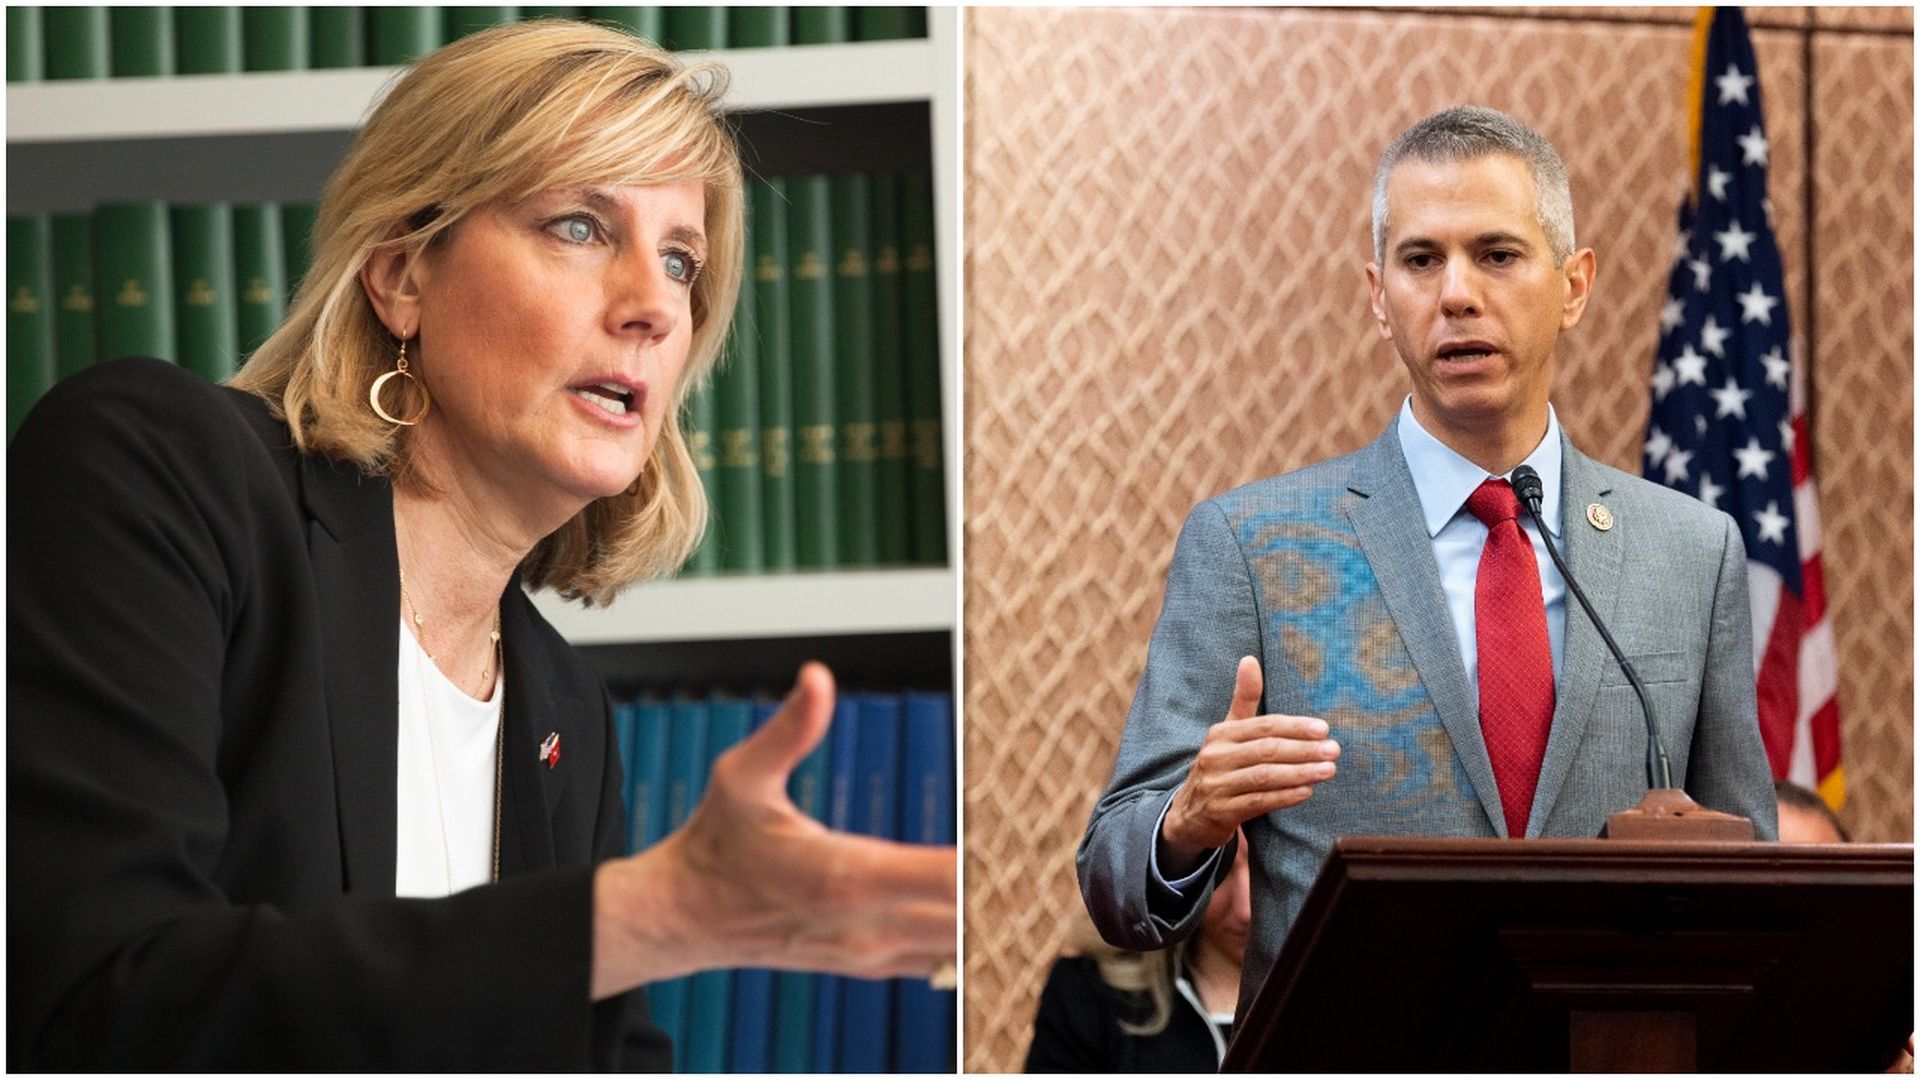 Photo of Claudia Tenney speaking on the left and Anthony Brindisi speaking on the right